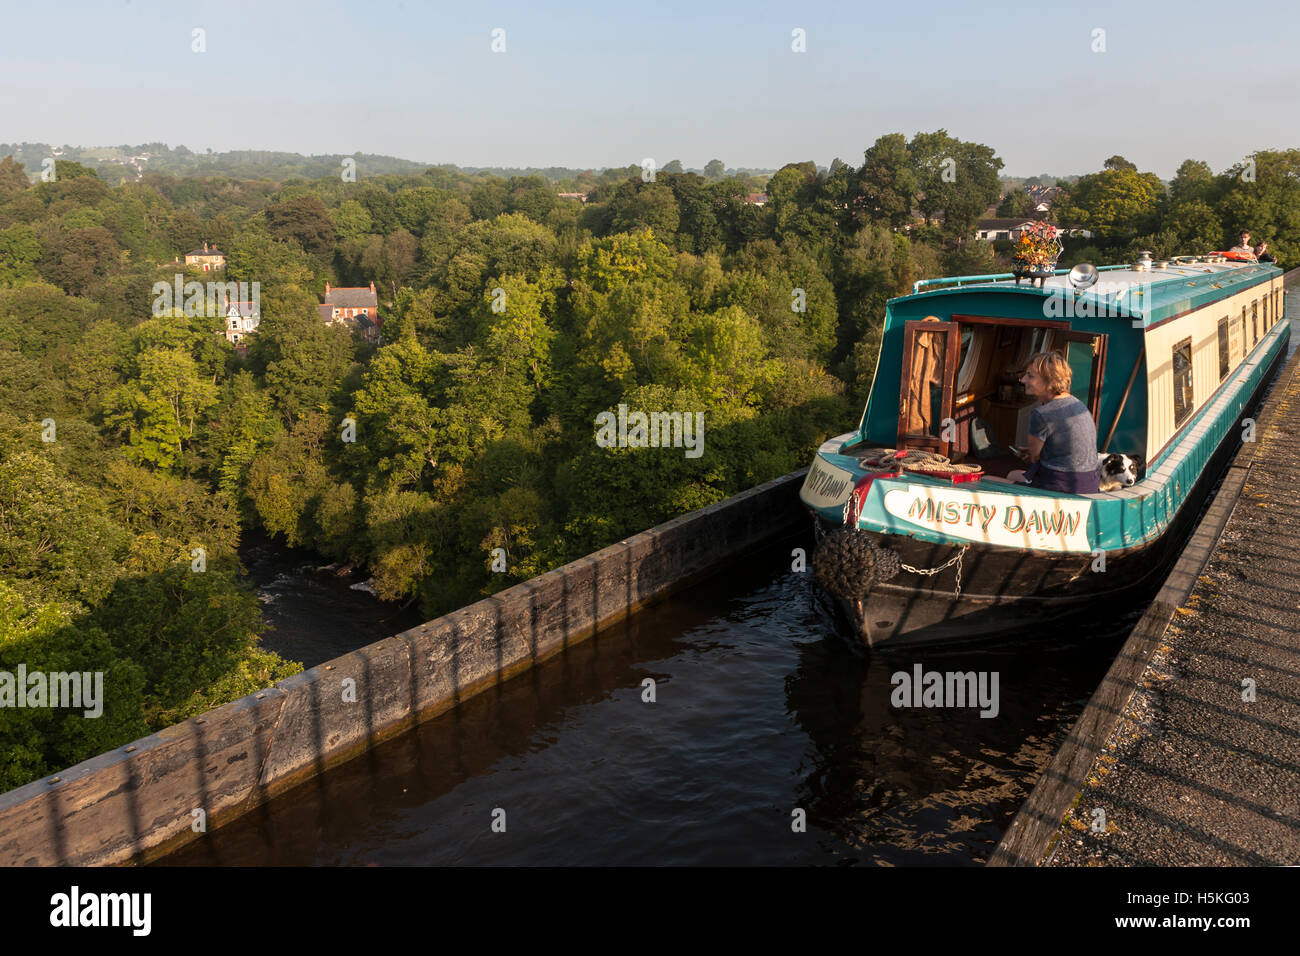 Narrowboat on the Pontcysllyte Aqueduct, Llangollen Canal, Wrexham, Wales.  MODEL RELEASED Stock Photo